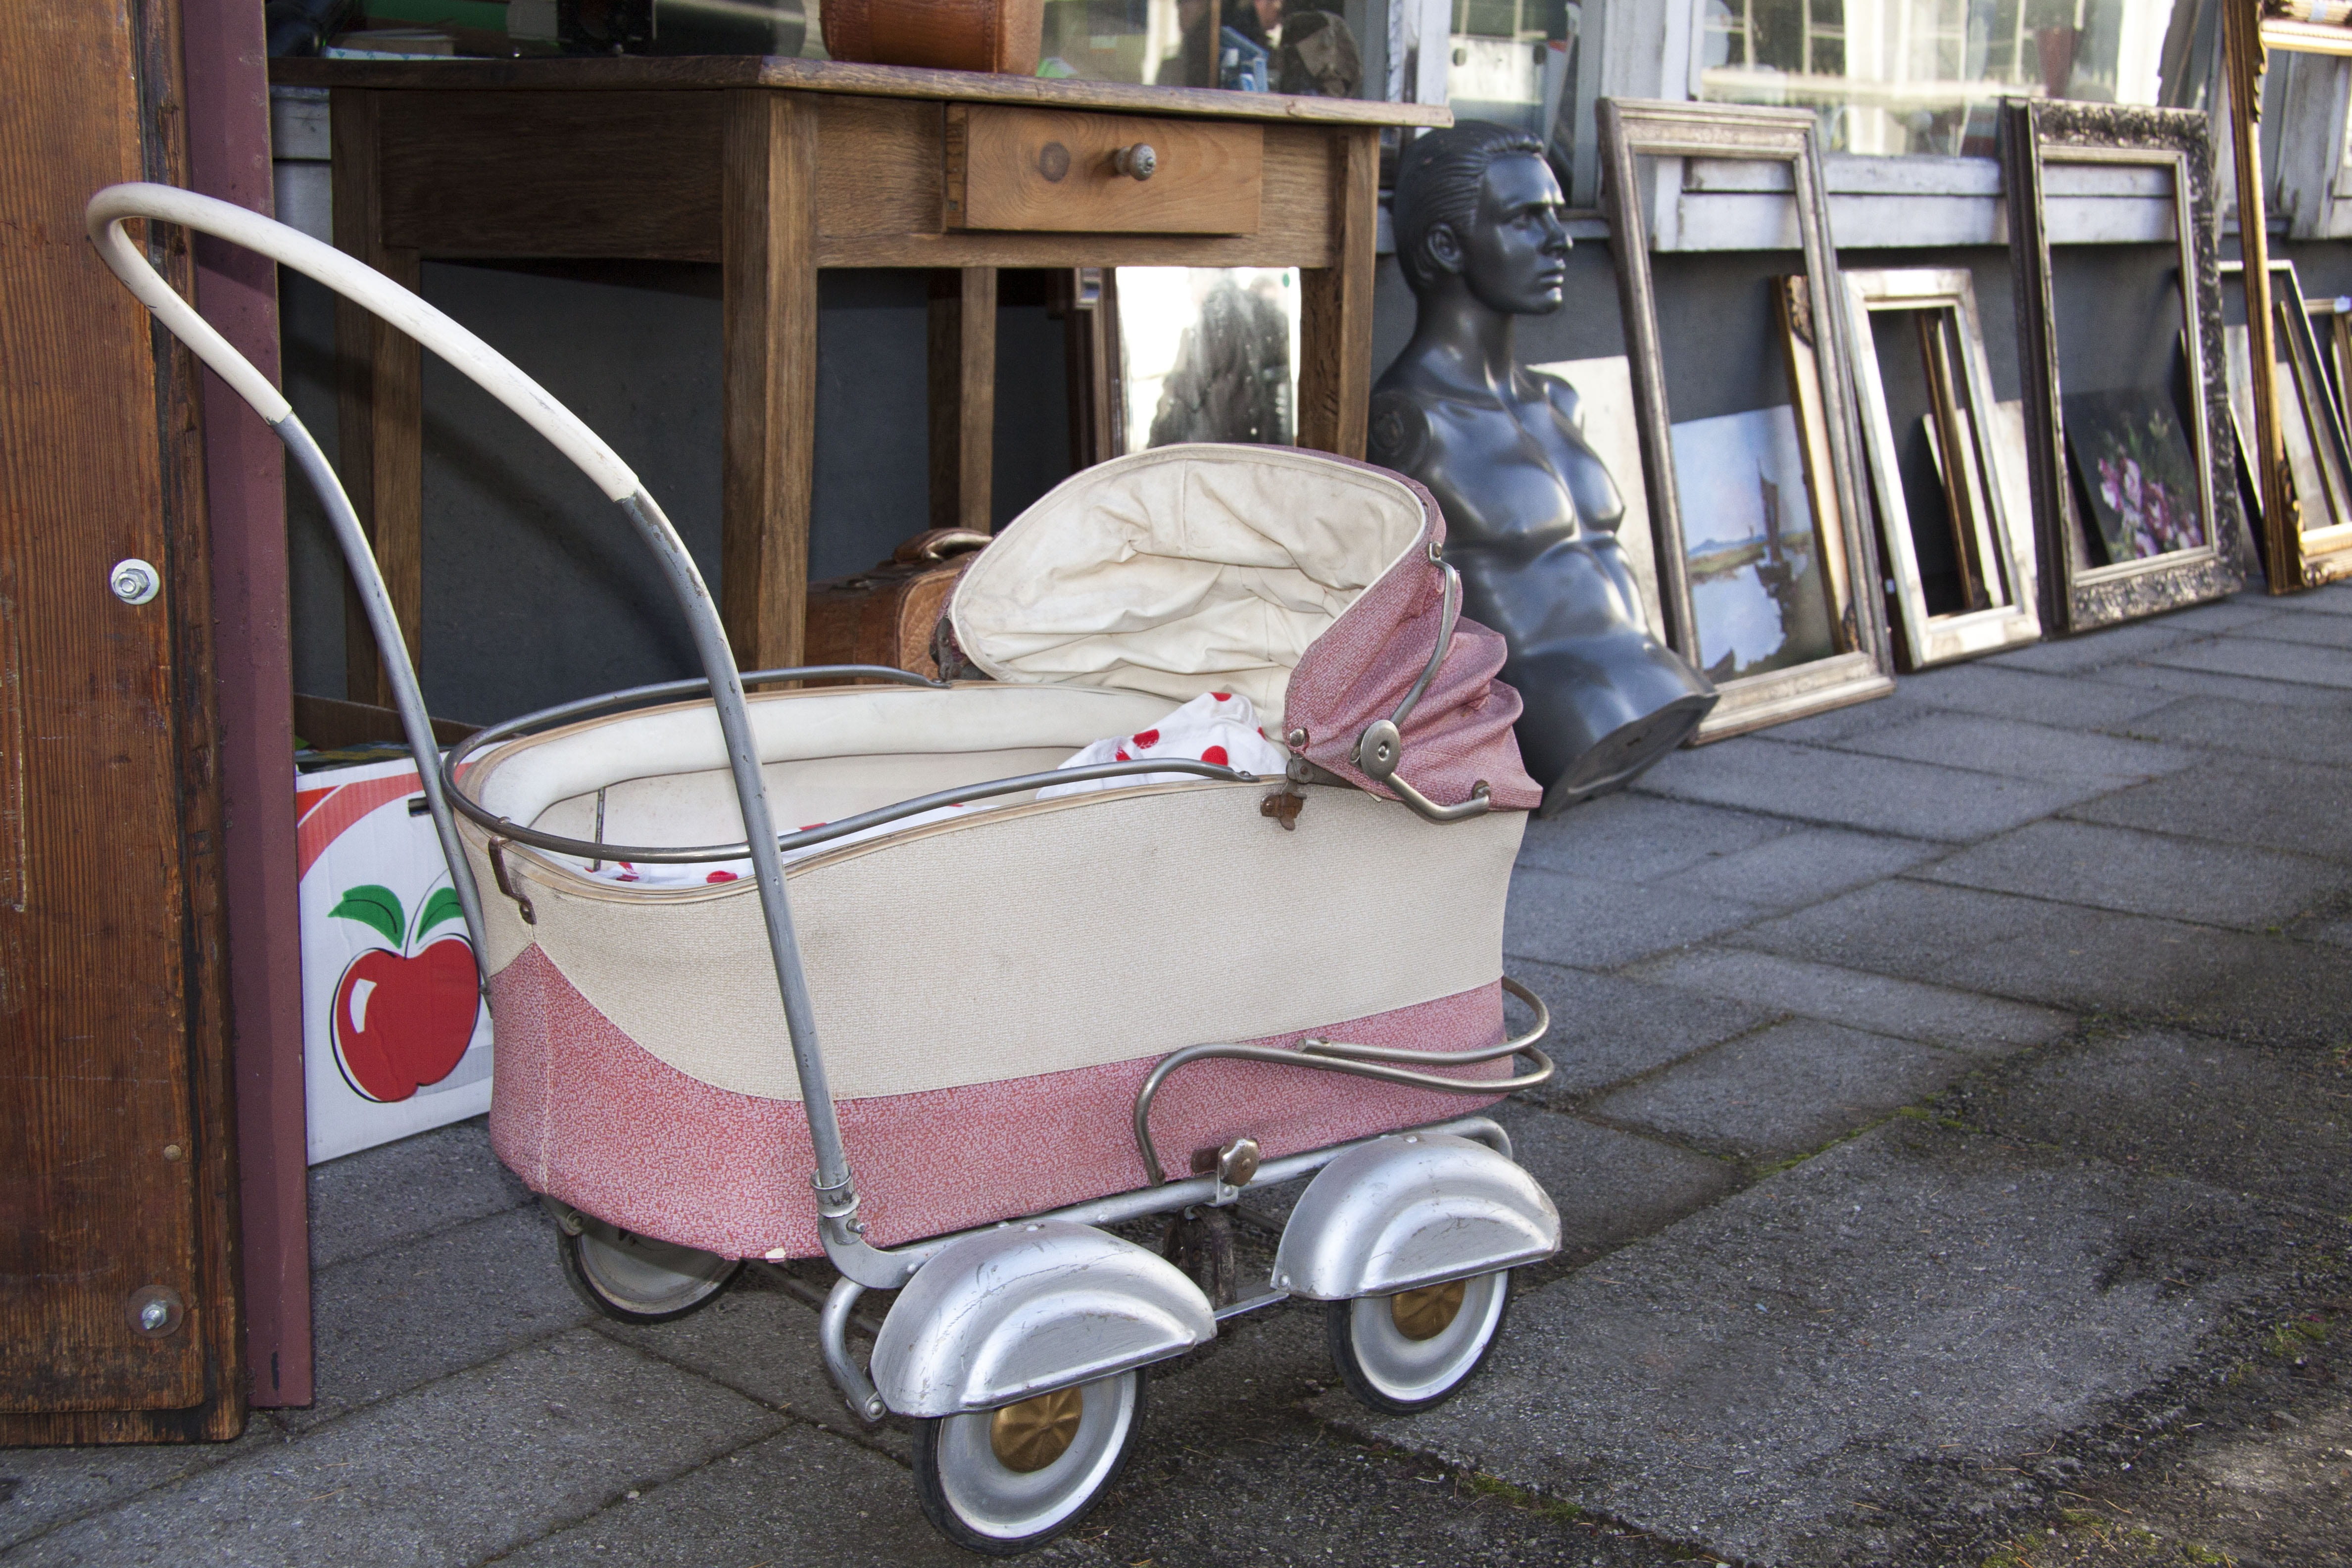 Why do Danes leave their babies unattended in strollers outside?